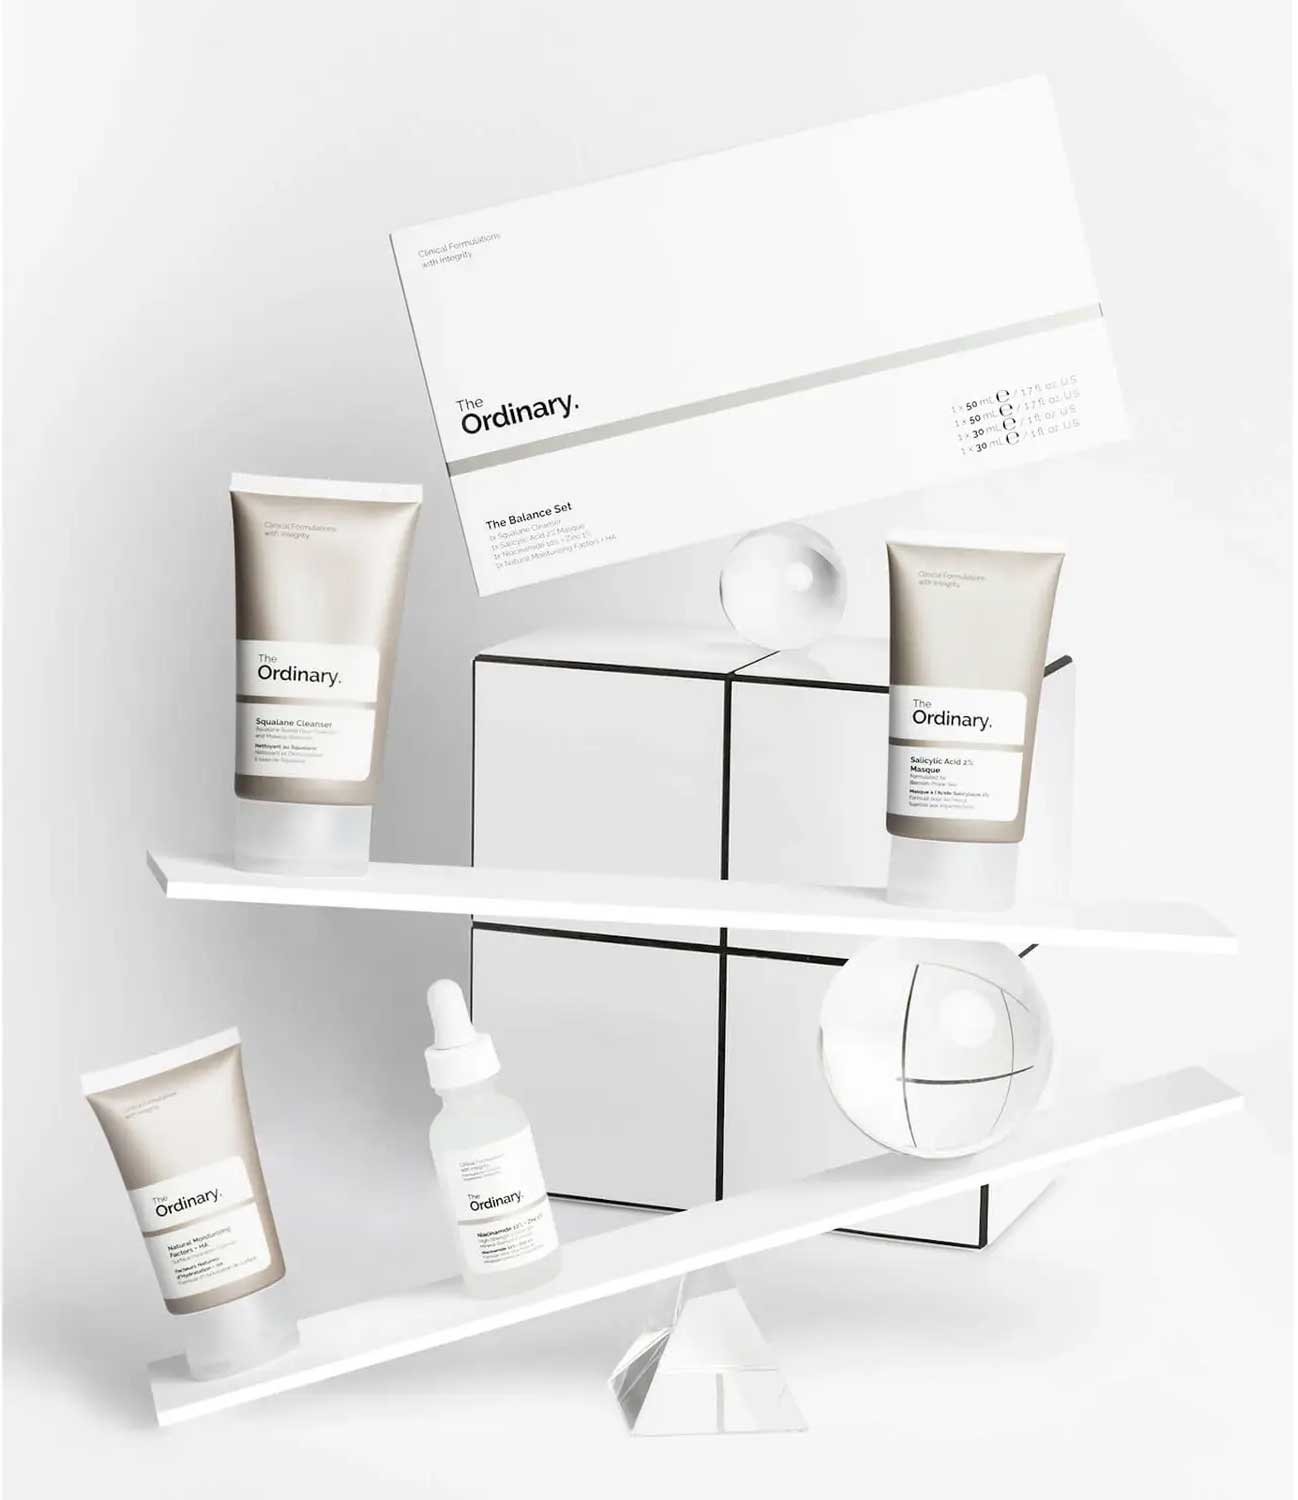 top gifts for her under £50 - The Ordinary The Balance Set: Elevating Your Skincare Routine